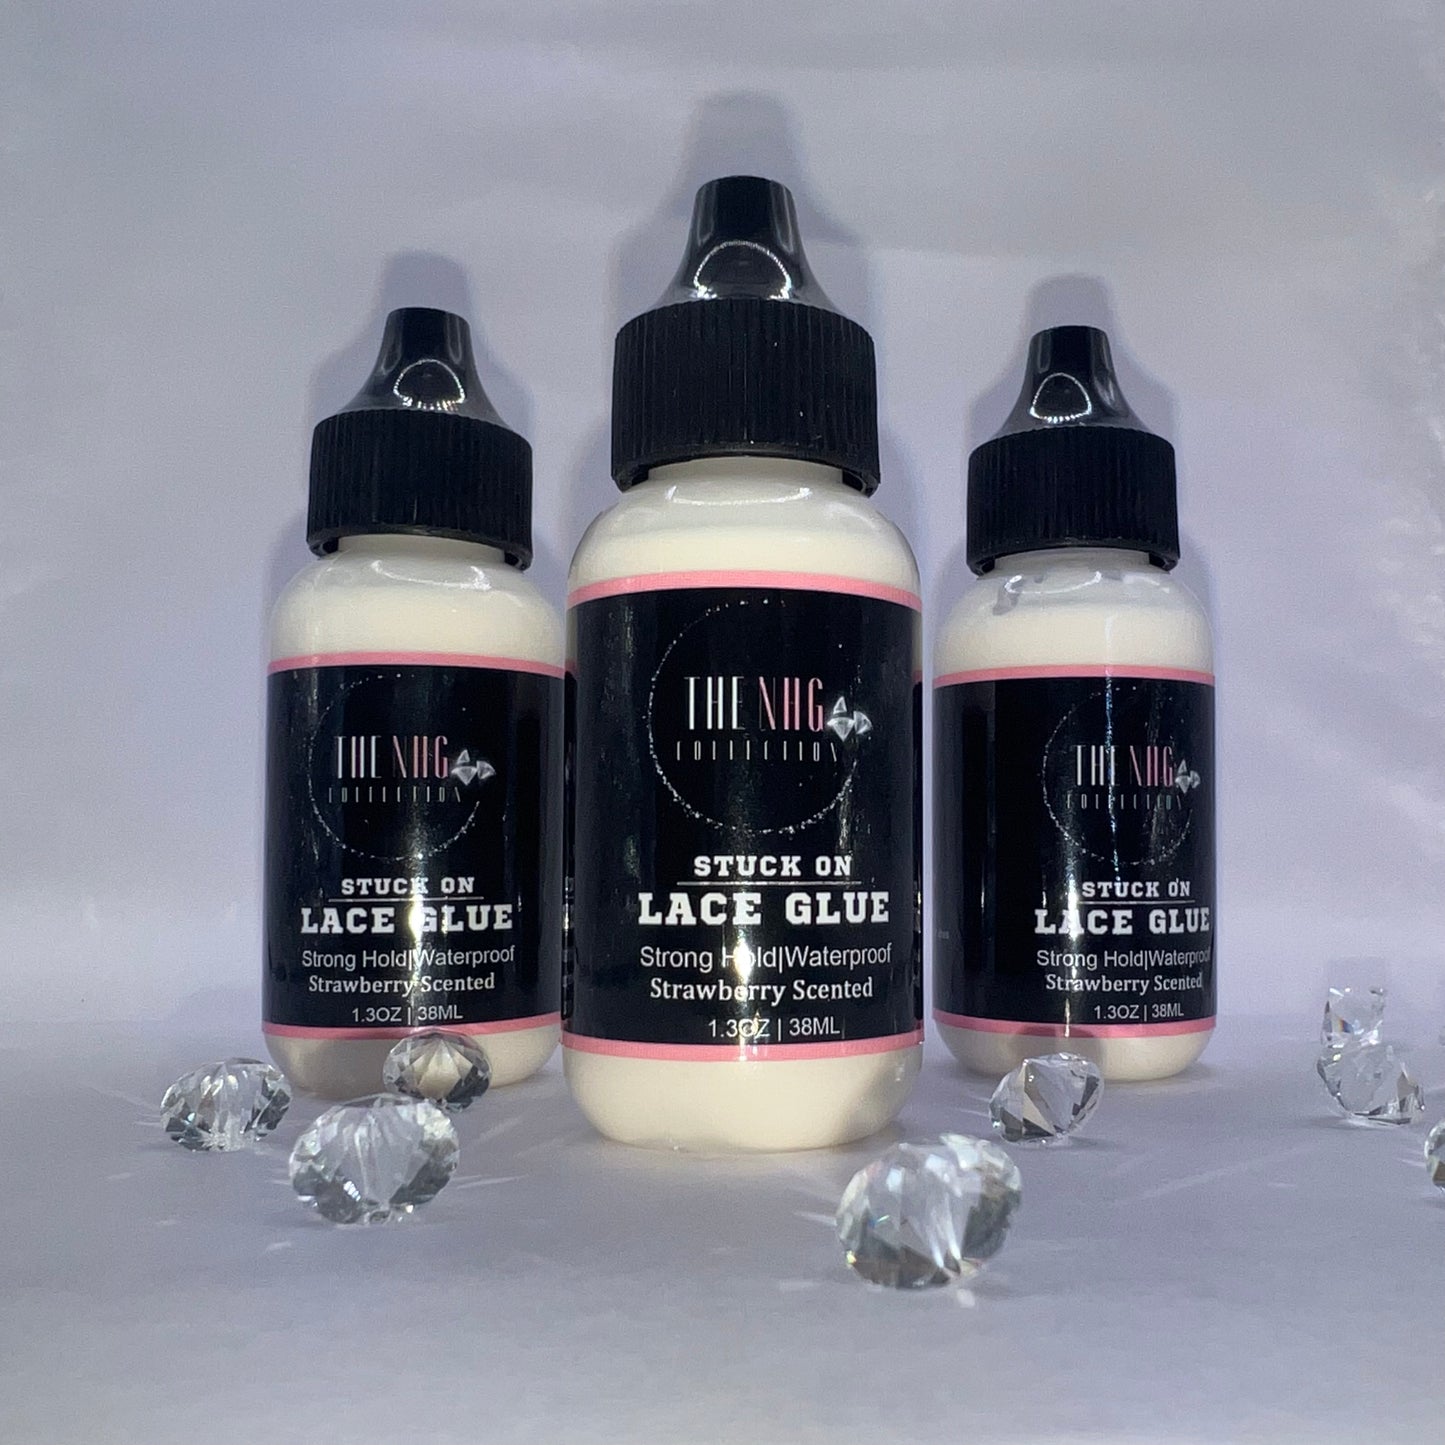 Stuck On Lace Glue 38ml – The NHG Collection